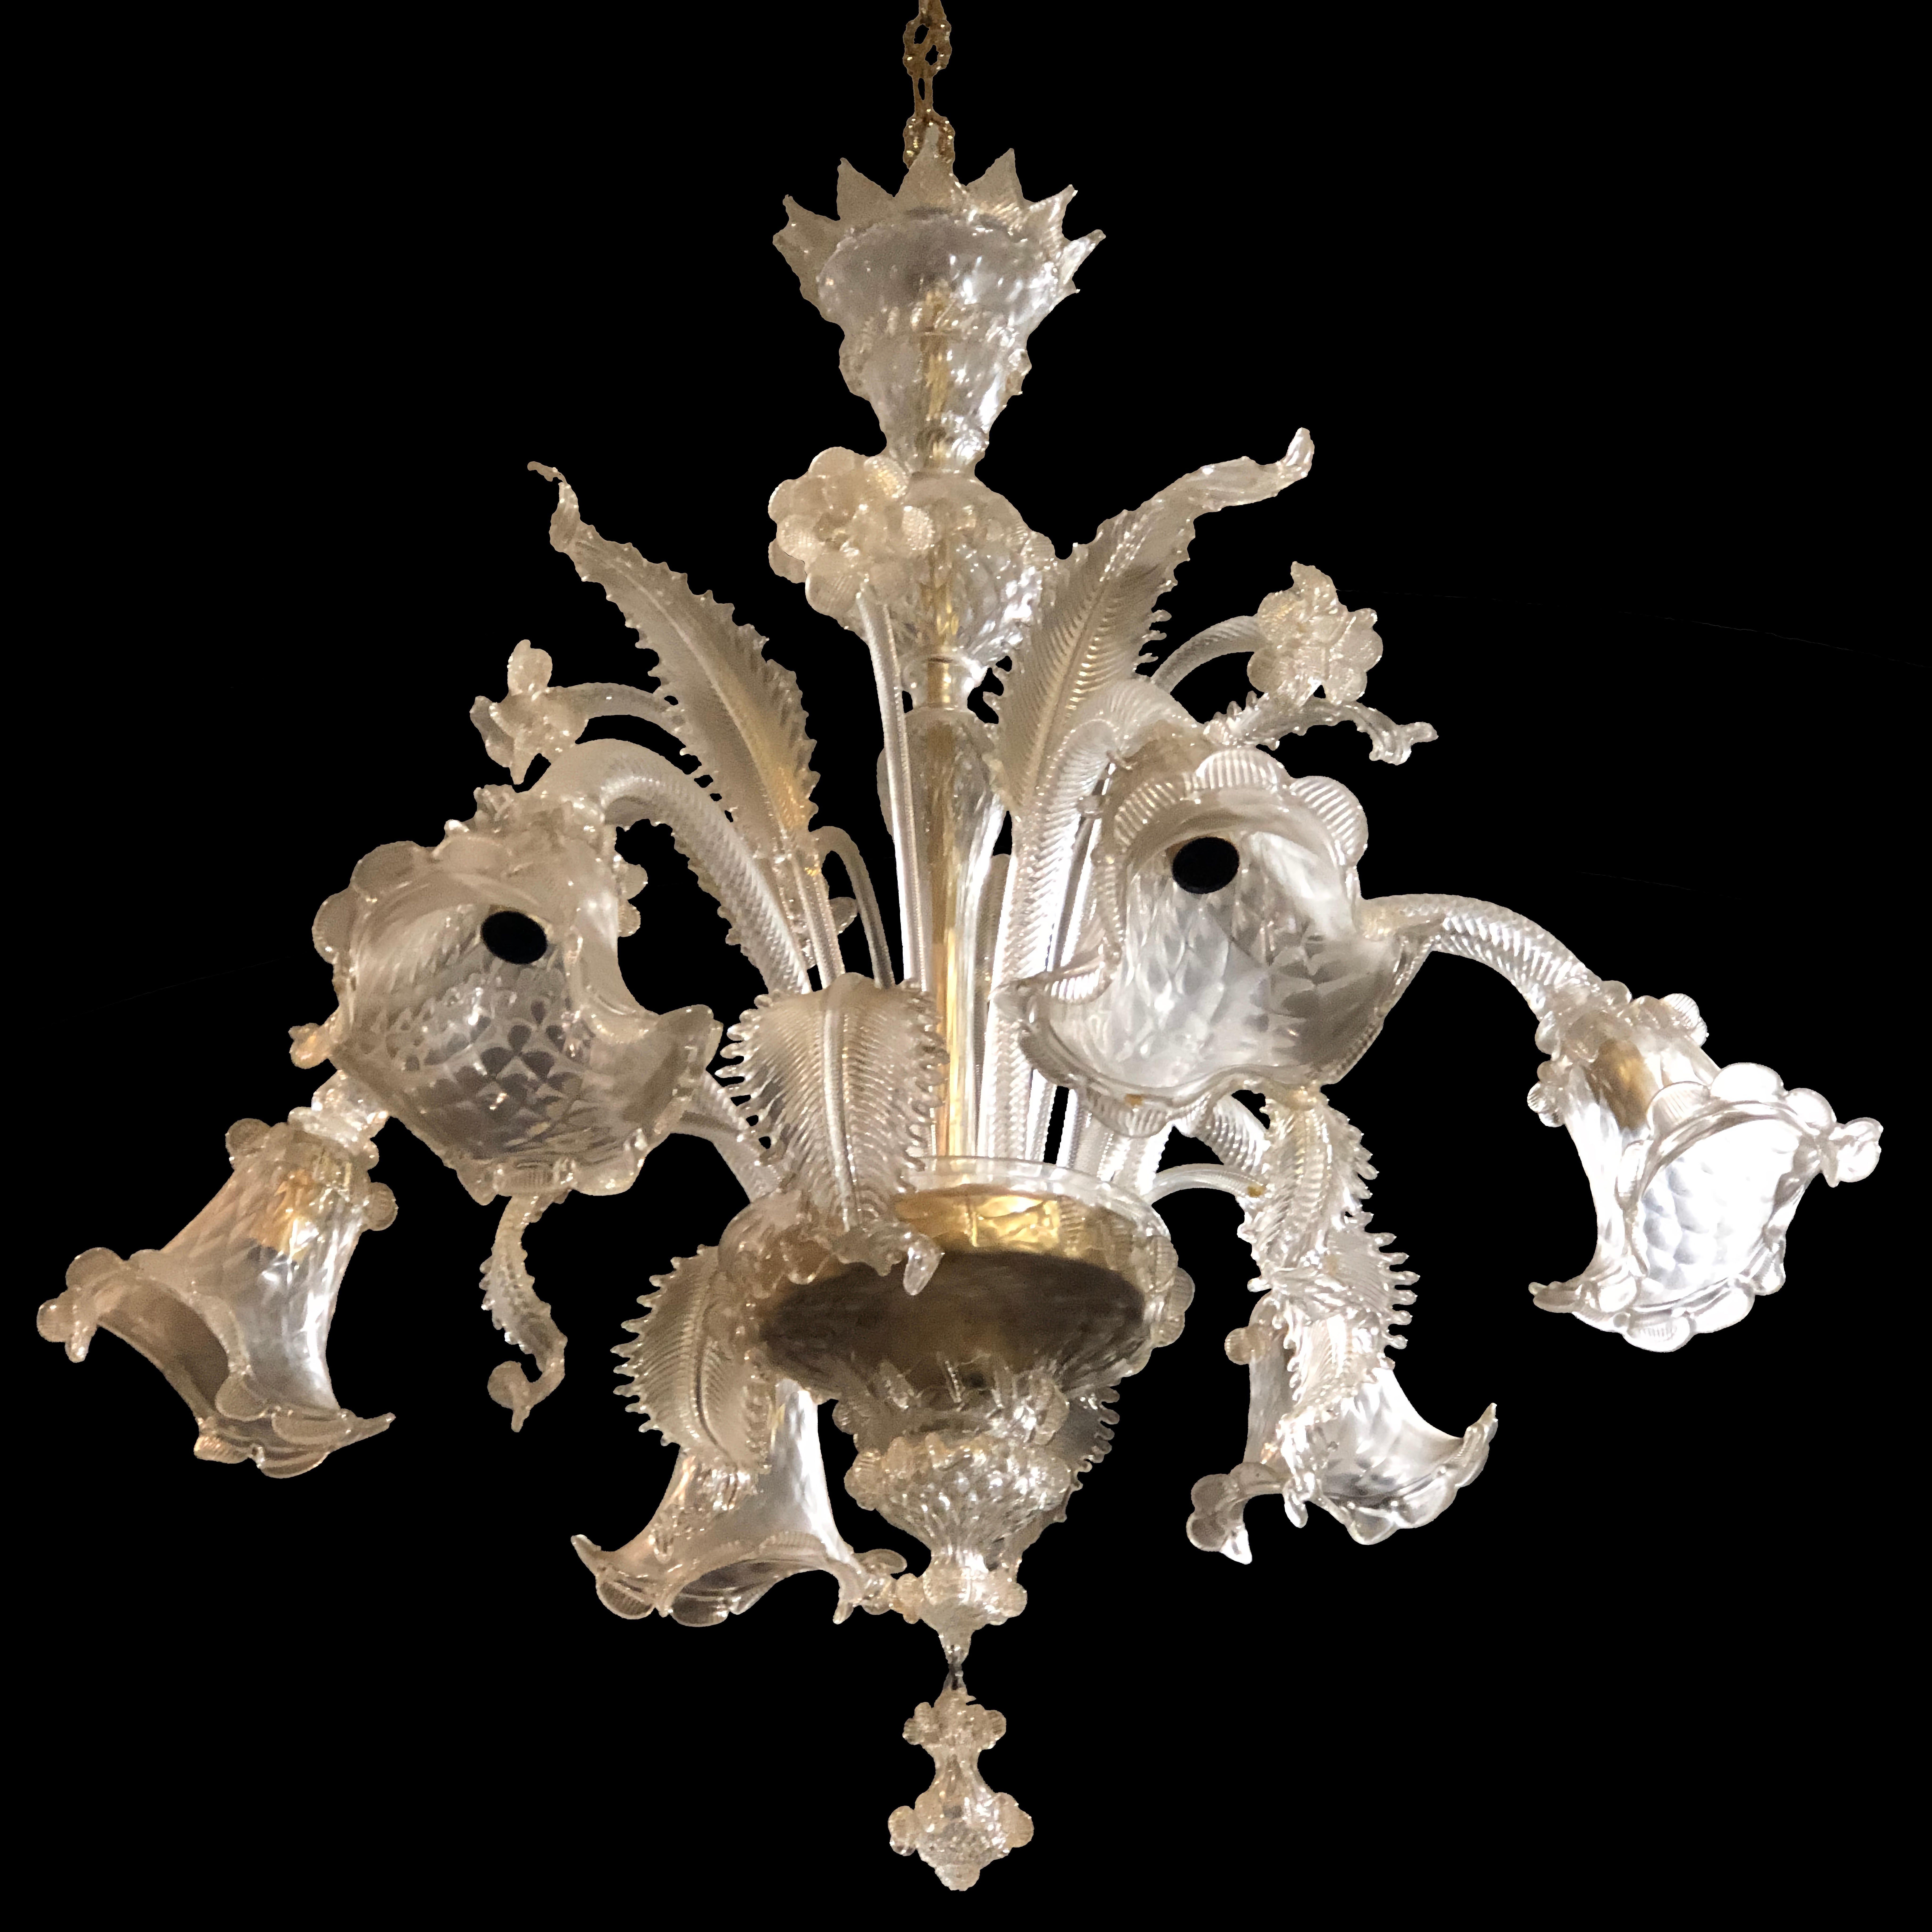 Murano, 1970s
6 lights
Diameter about 85 cm.
Height approx.90 cm + further brass chain up to 145 cm.